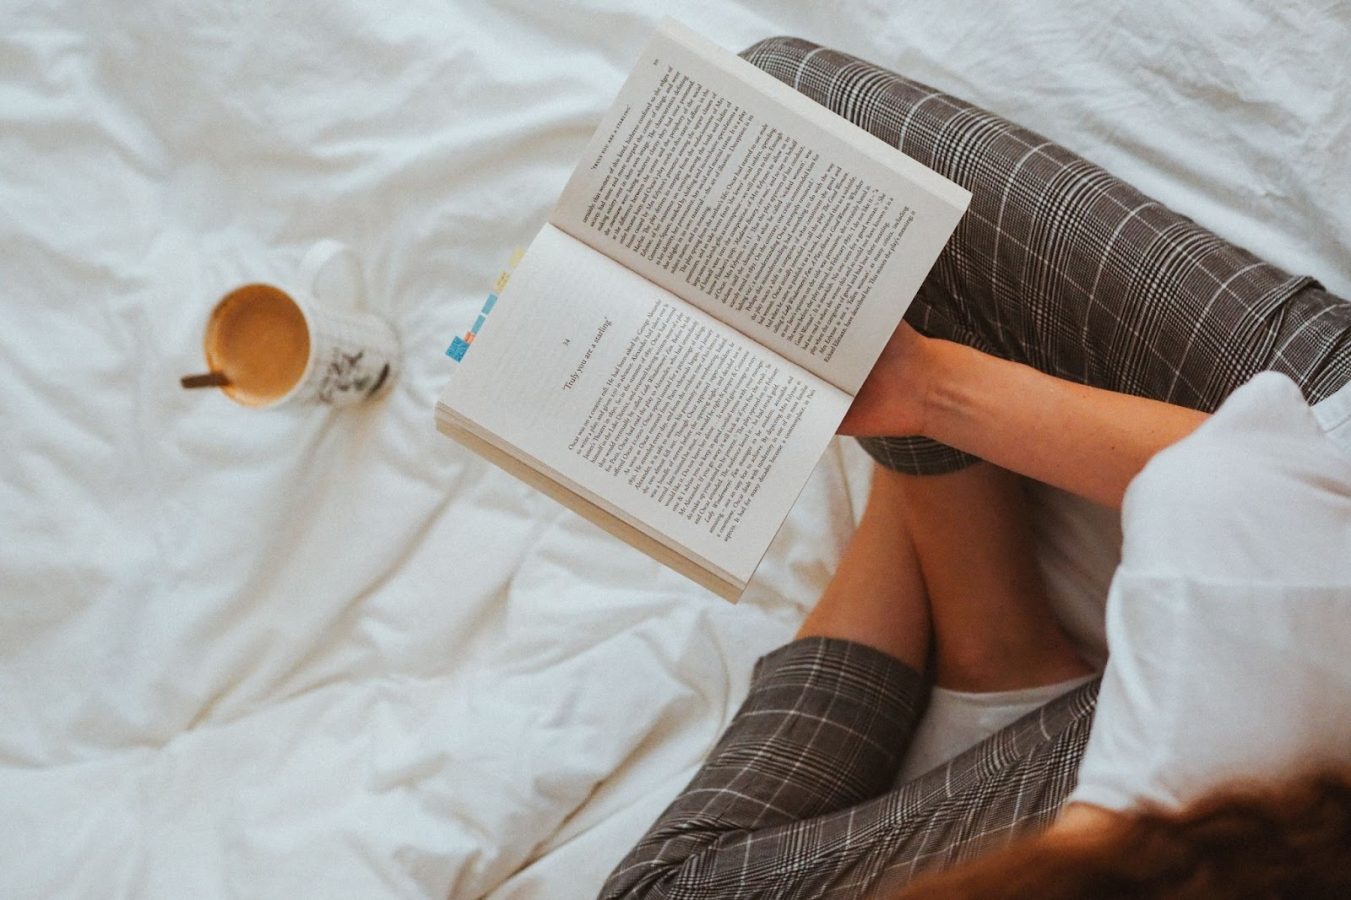 Top-down view of a person reading a book while sitting cross legged on white sheets with a mug of tea.